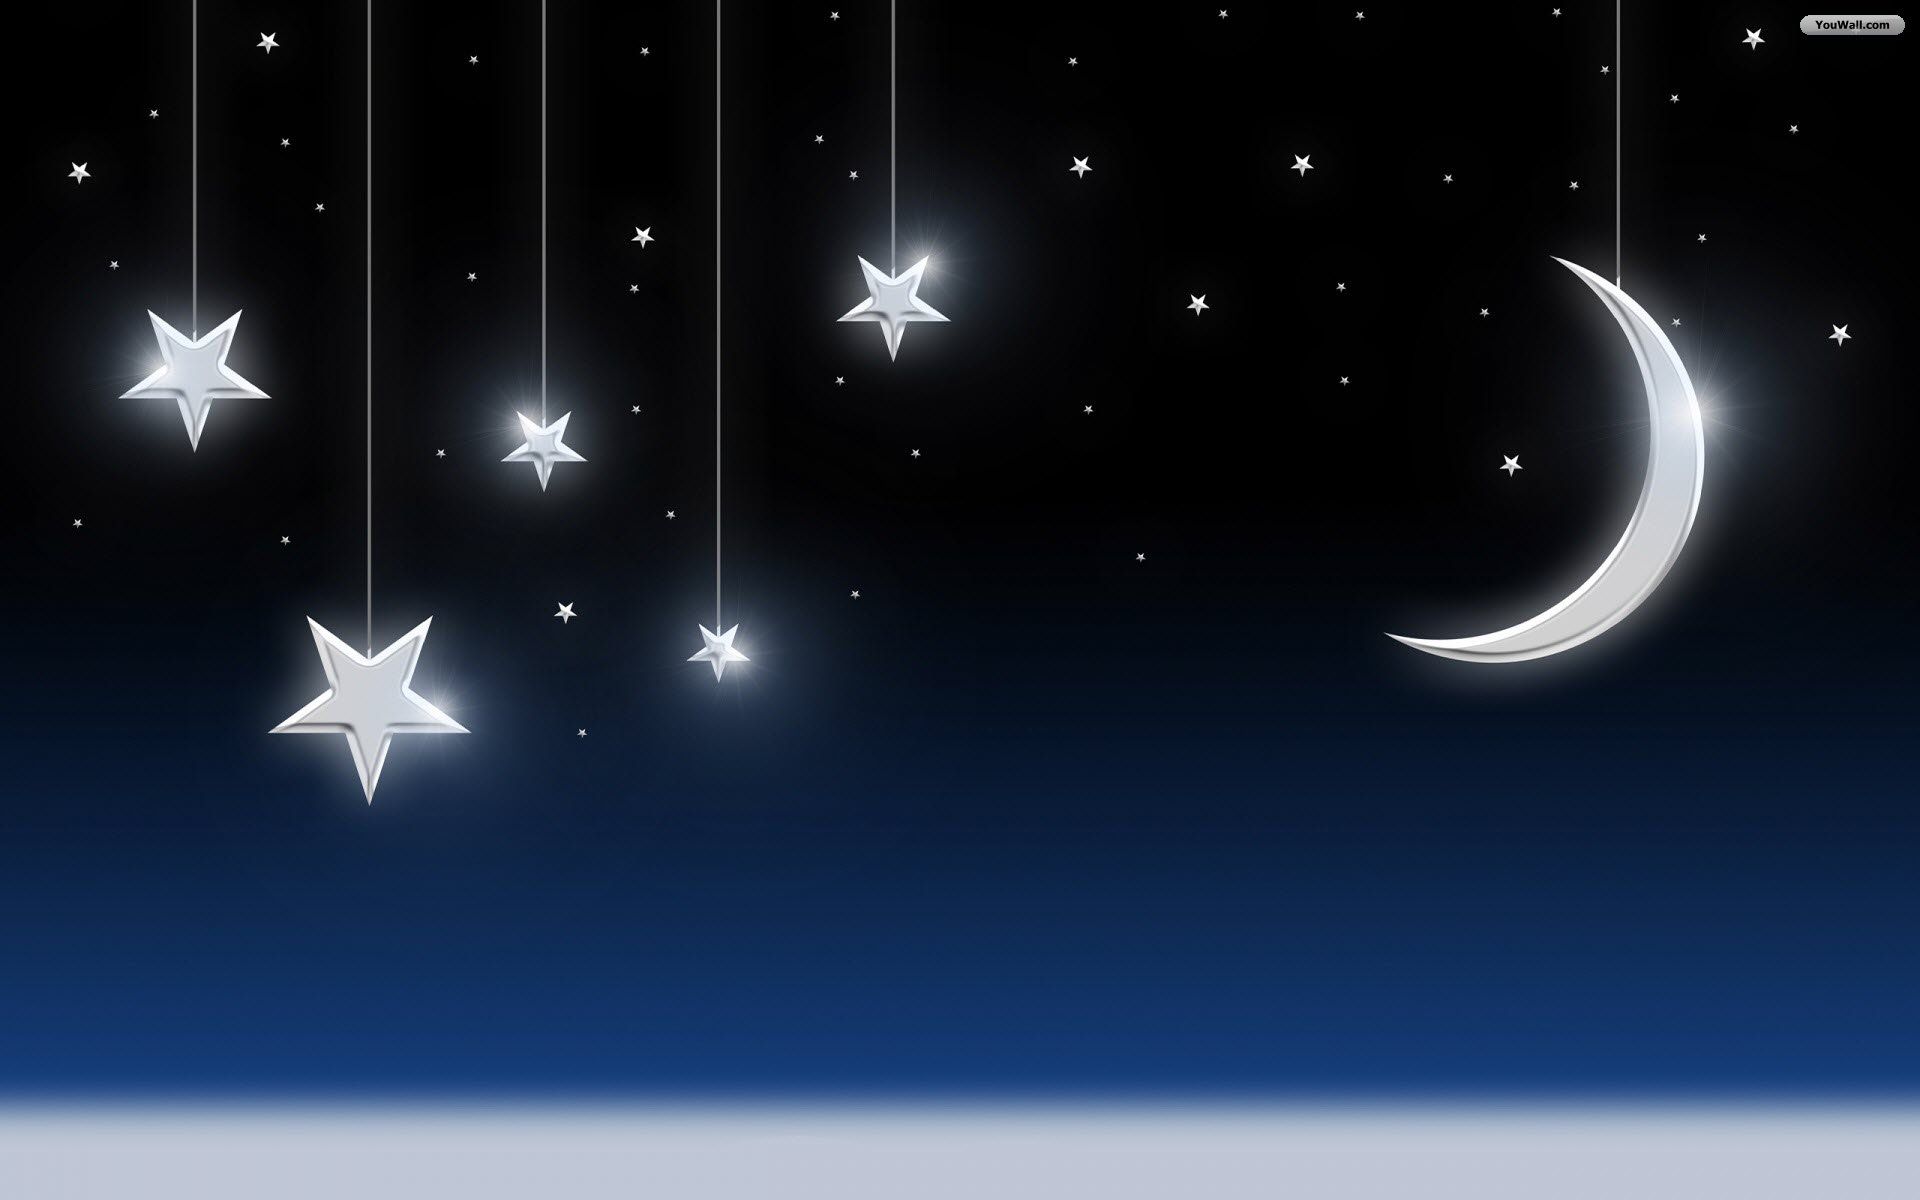 Stars and Moons Desktop Wallpaper - Pics about space